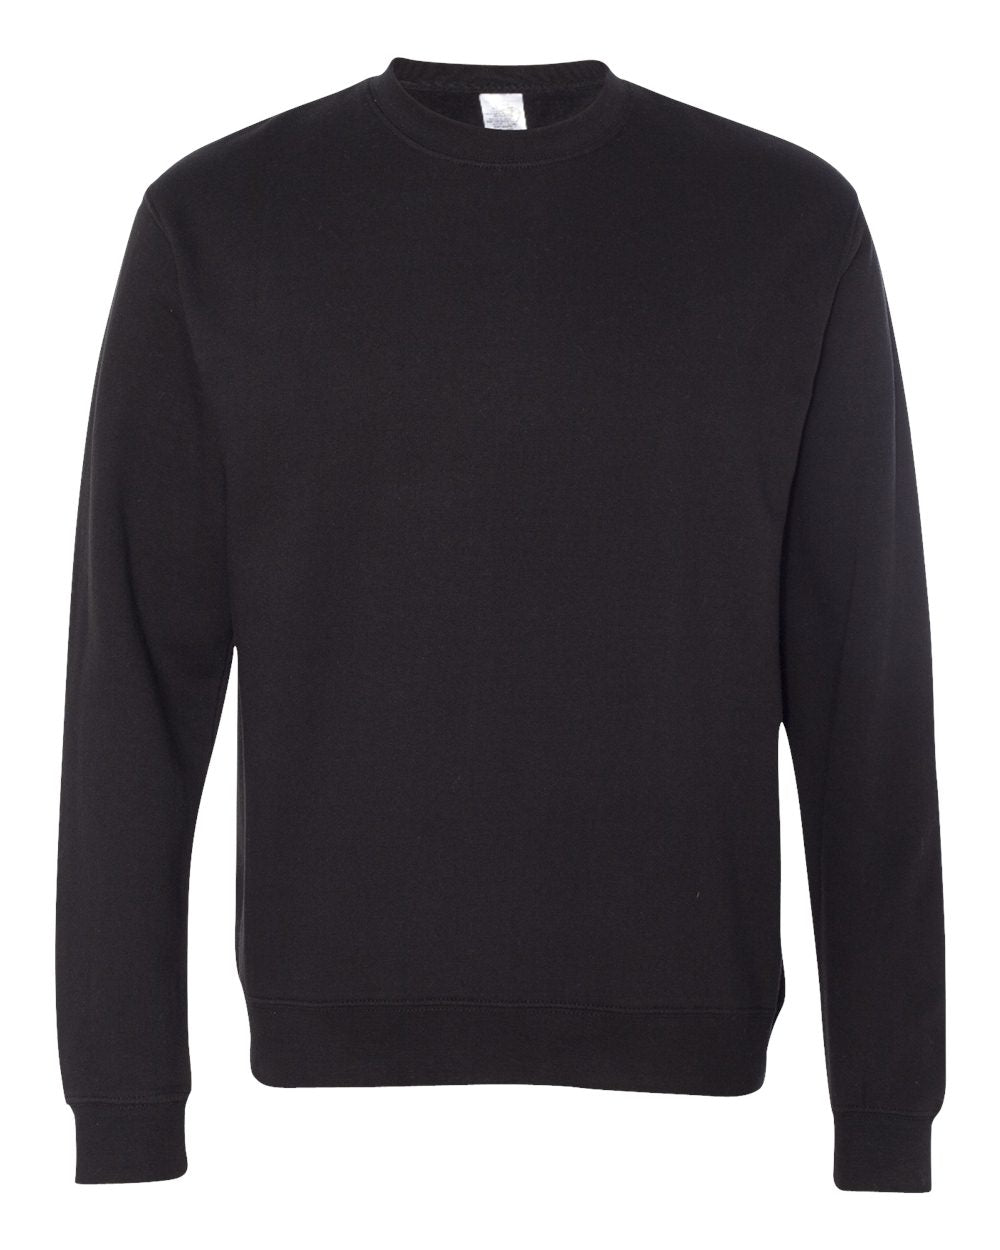 Pretreated Independent Trading Co. SS3000 Midweight Sweatshirt